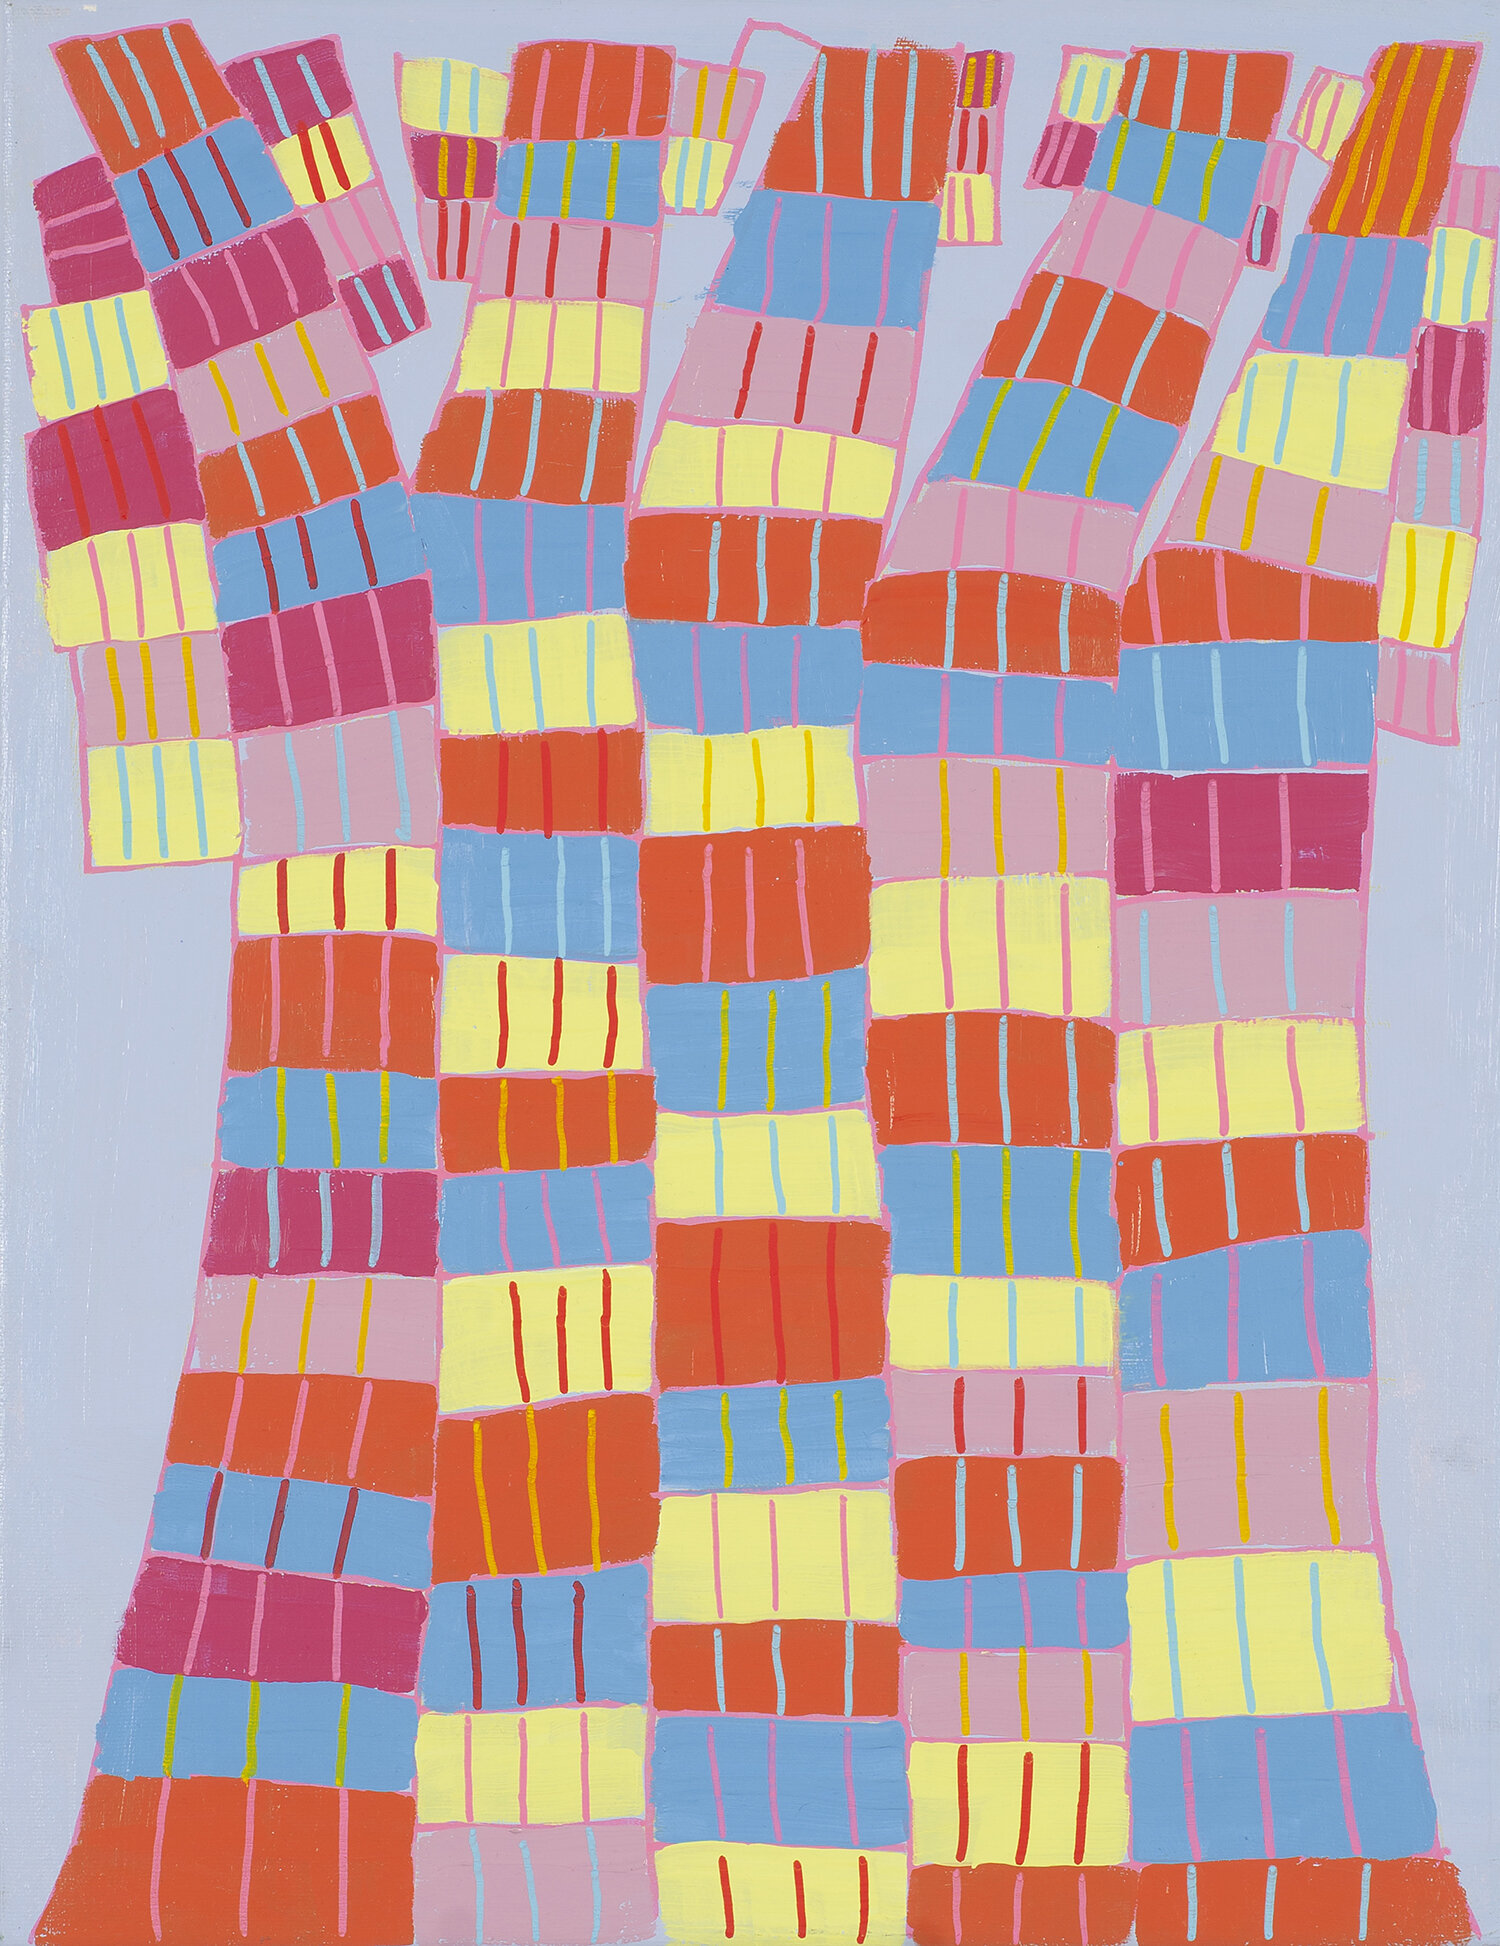 Mike Hinchcliff, Untitled (colourful checkered Tree), acrylic on canvas, 14” x 18”, 2019.